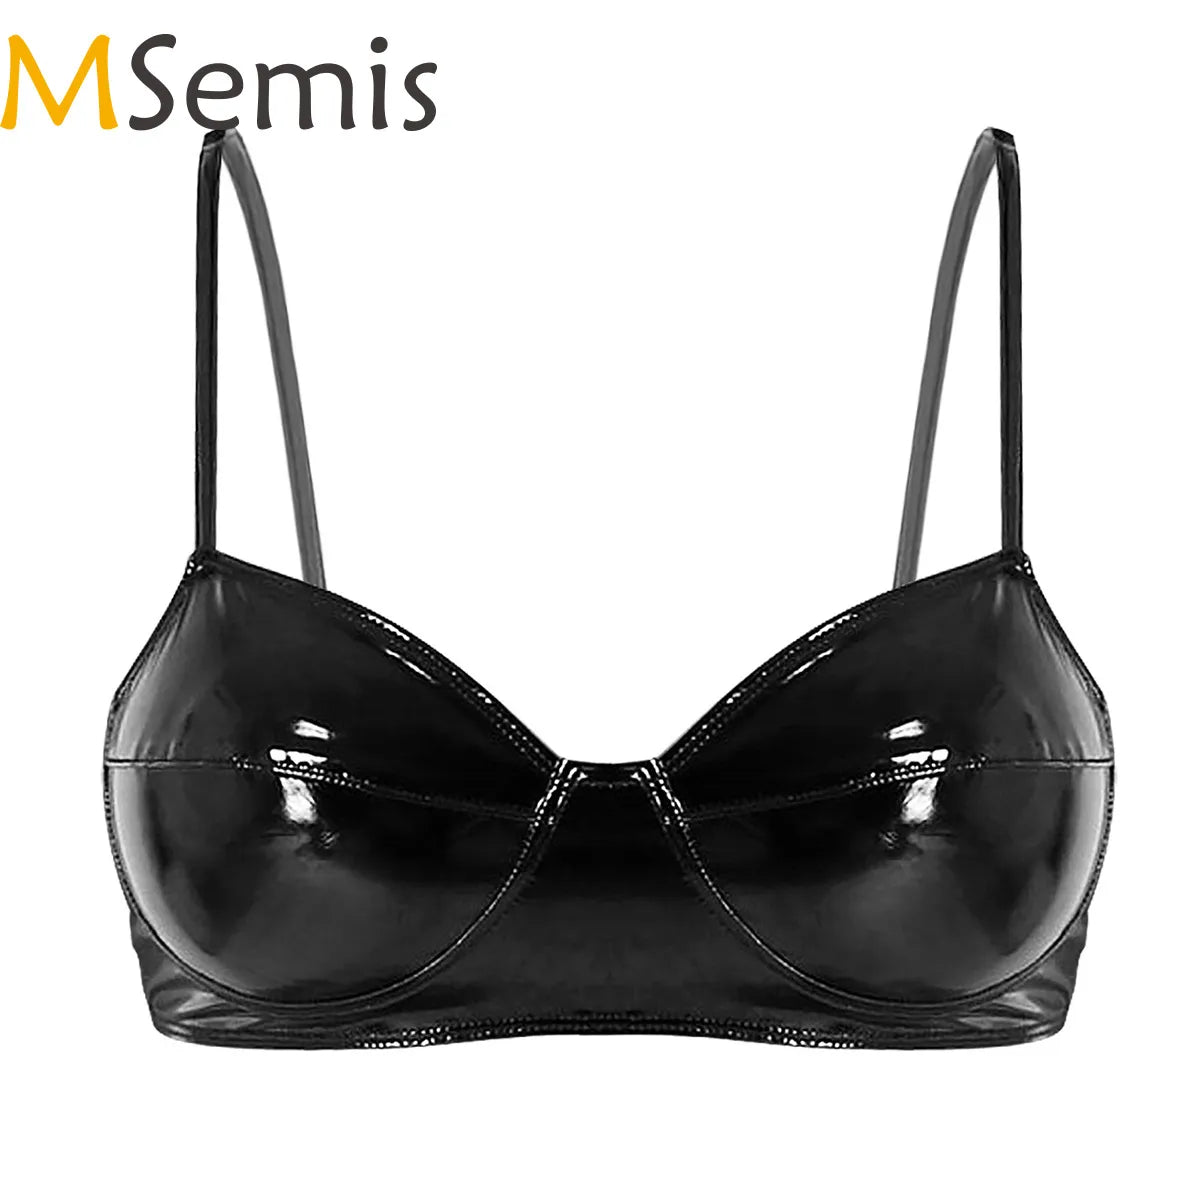 MSemis Black Womens Lingerie Fashion Wetlook Faux Leather Bra Sexy Wire-free No Pad Bra Top for Women for Raves Dances Clubwear